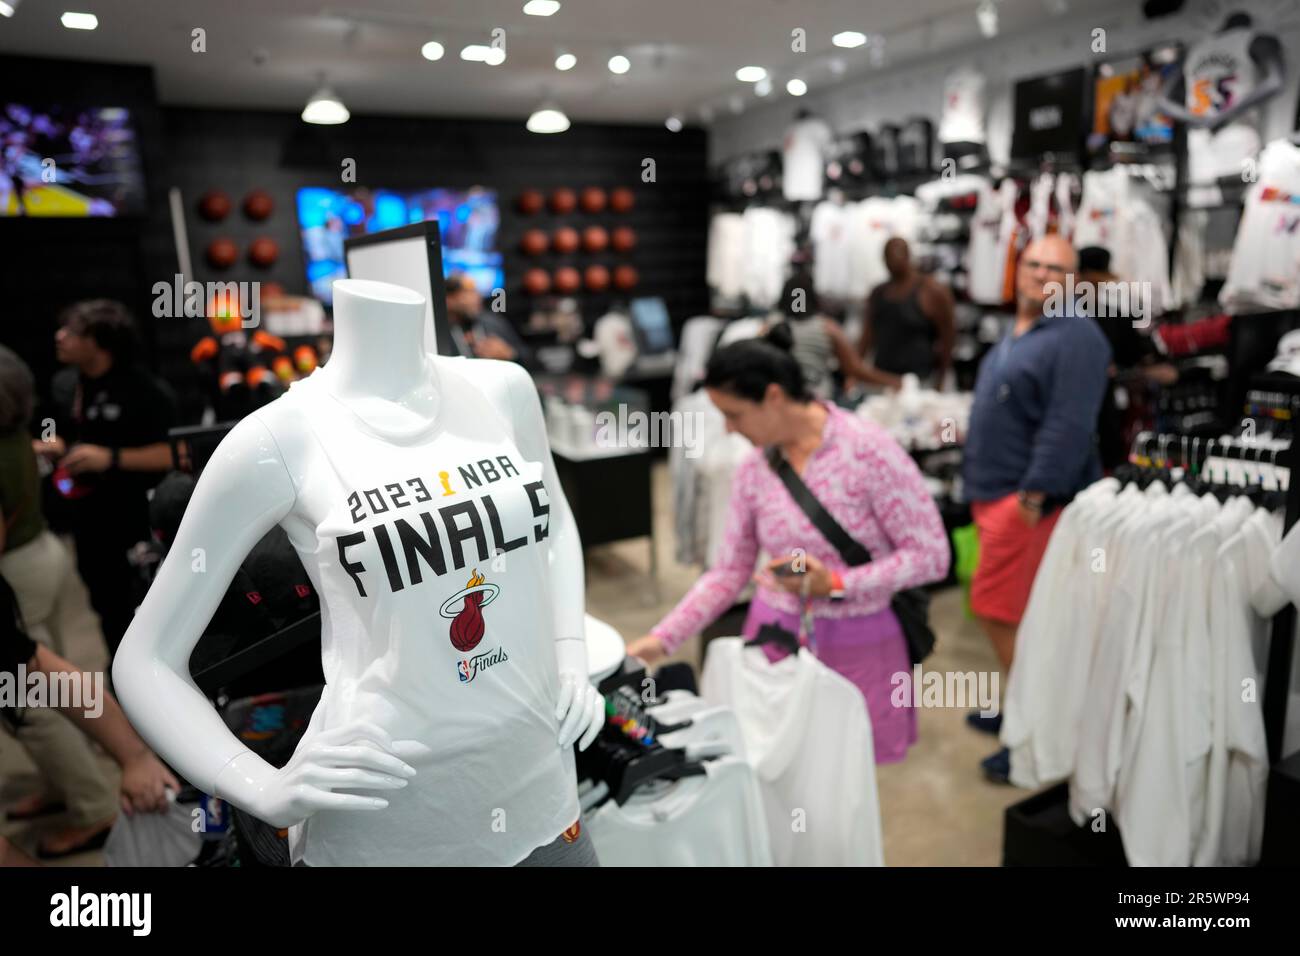 The Miami HEAT Store Is Opening A New Location